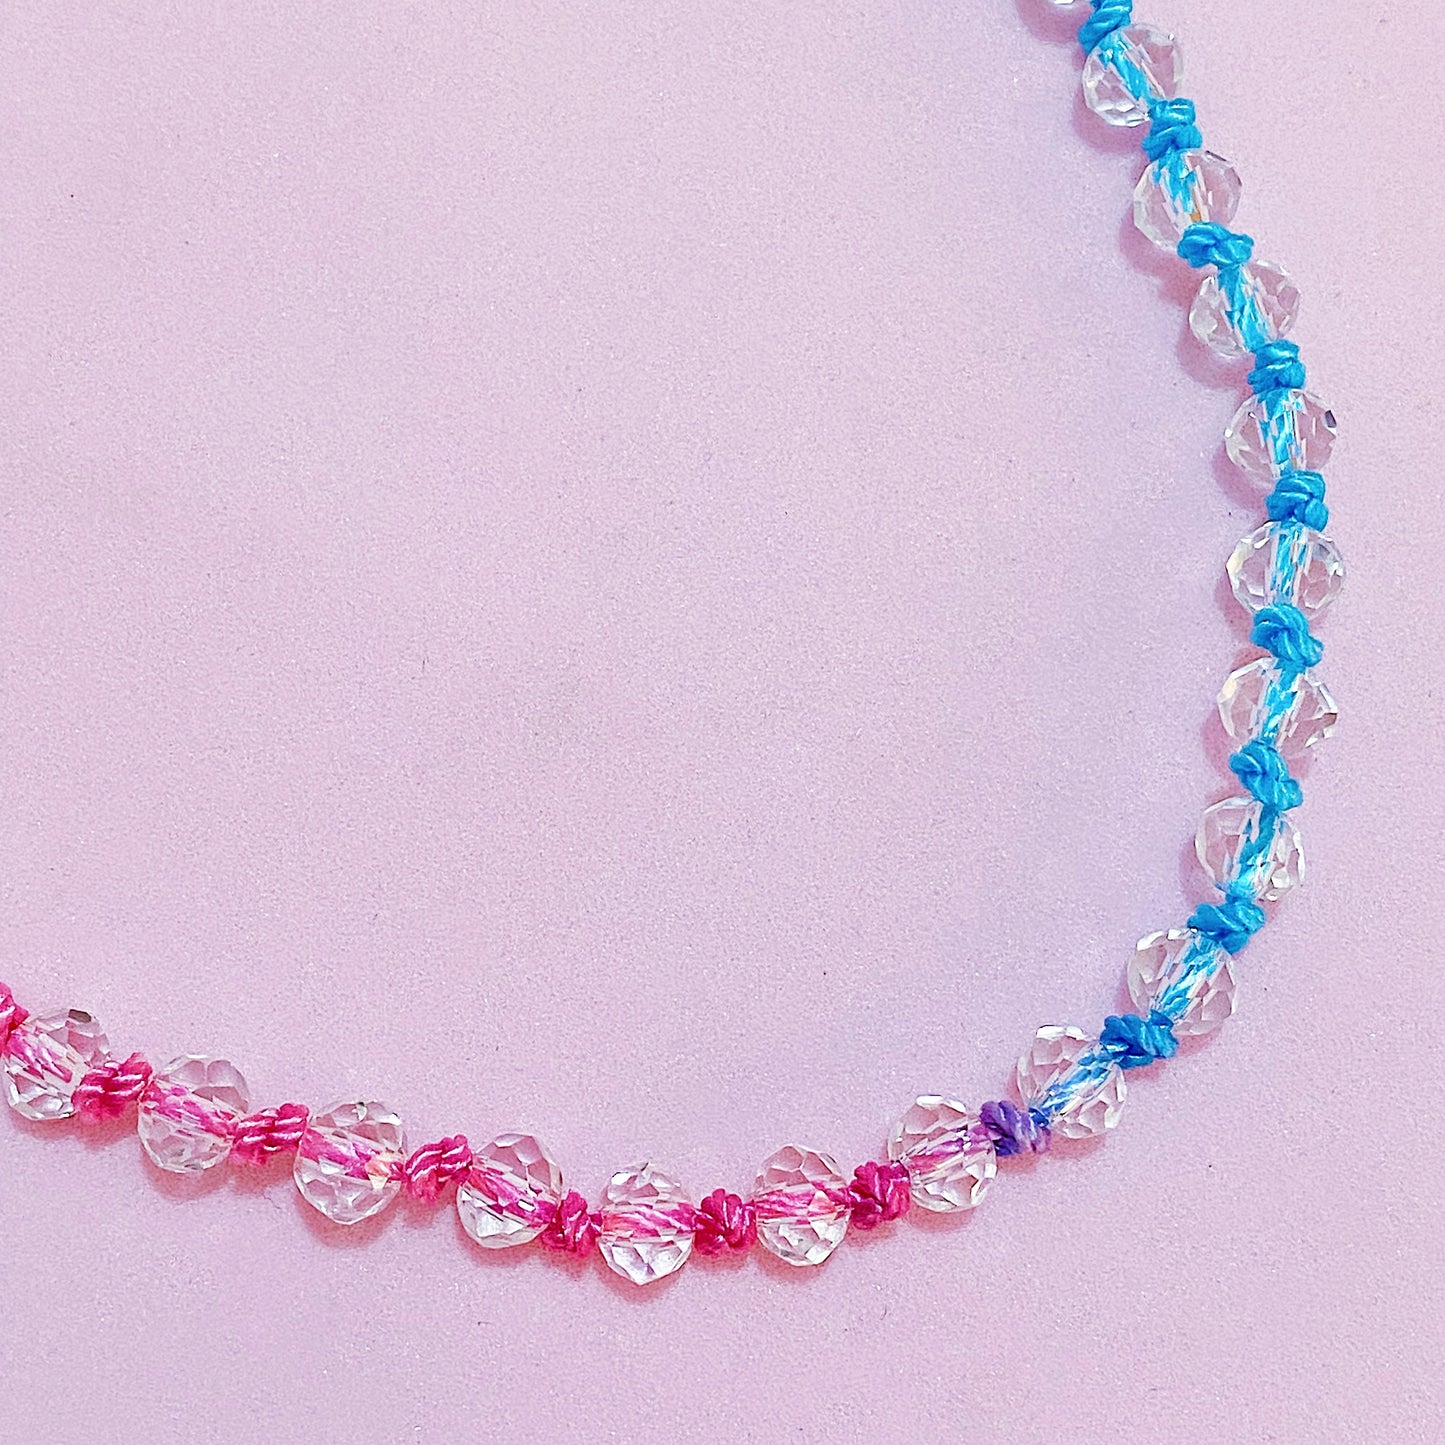 Rainbow Knotted Necklace